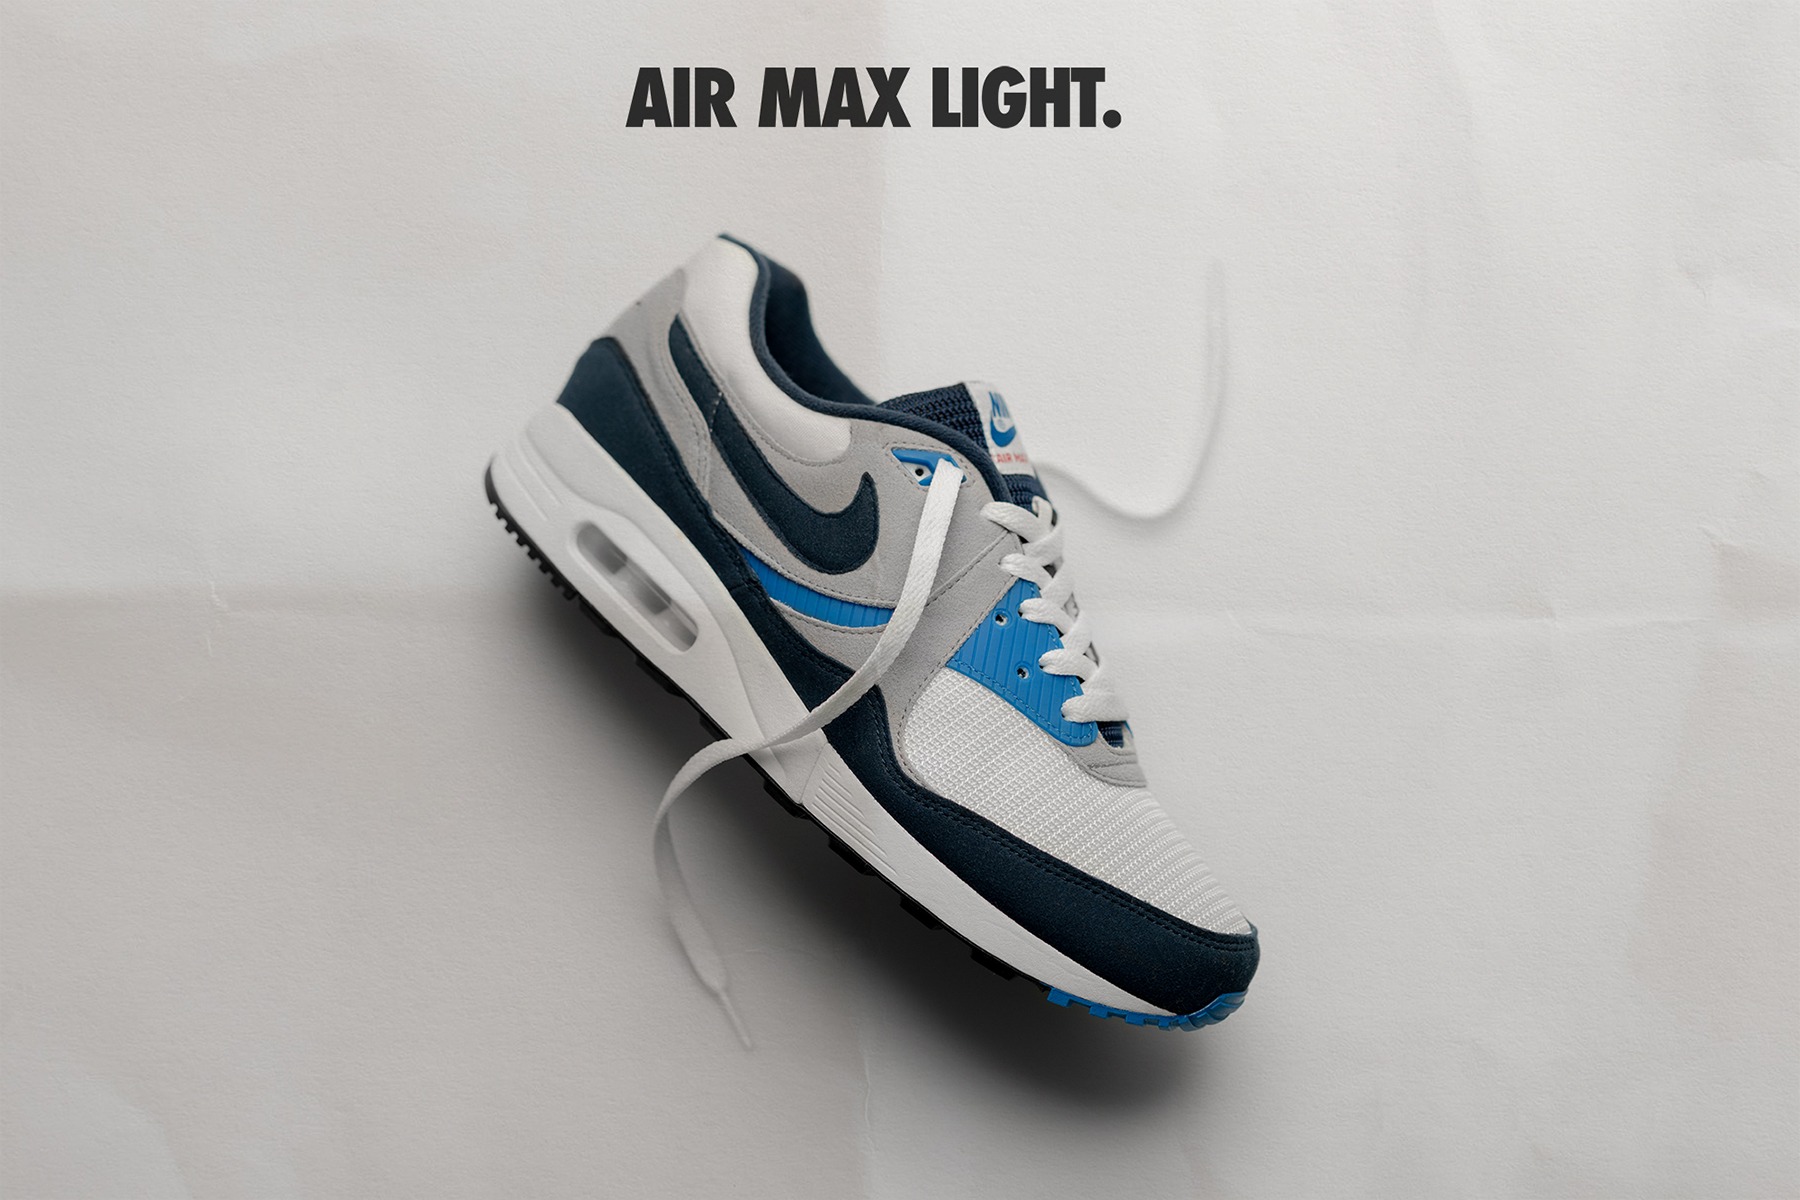 DONG GIAY THE THAO NIKE AIR MAX VUAGIAY.VN 011